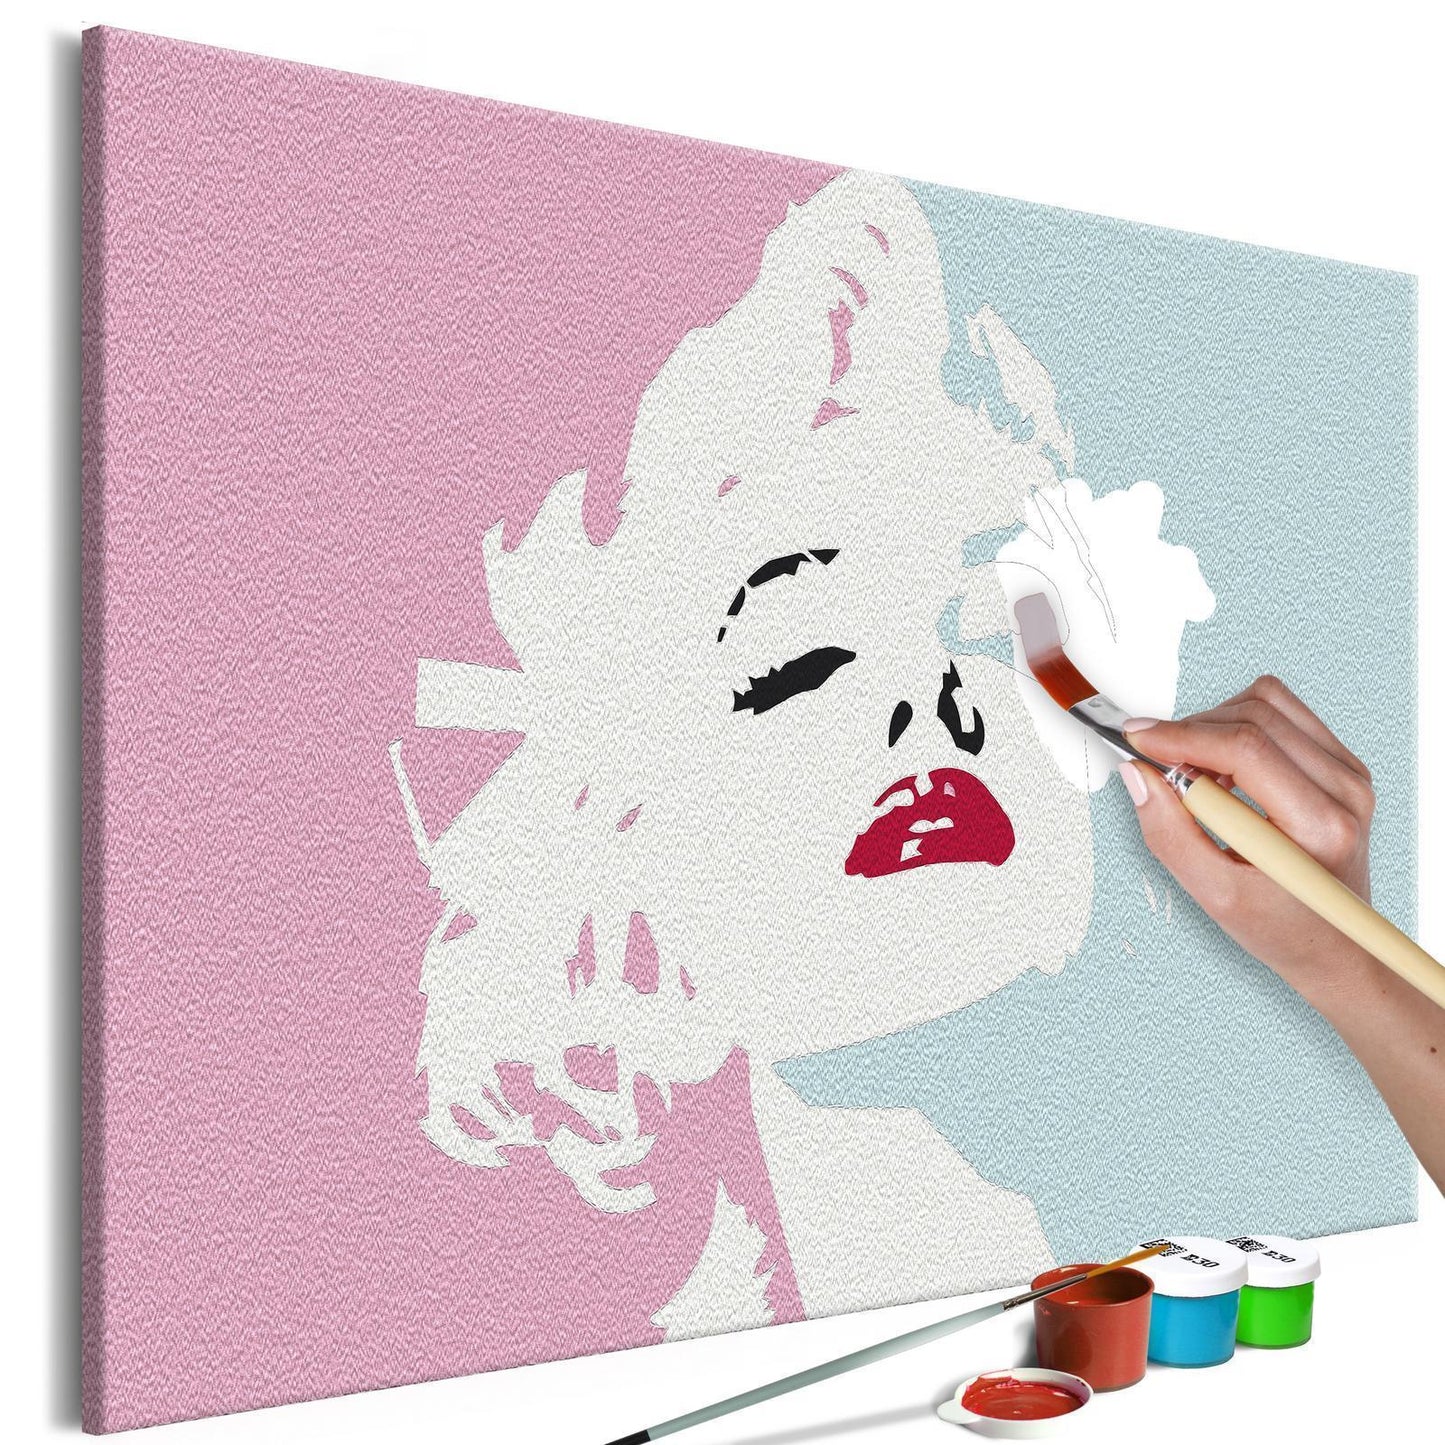 DIY Canvas Painting - Marilyn in Pink 